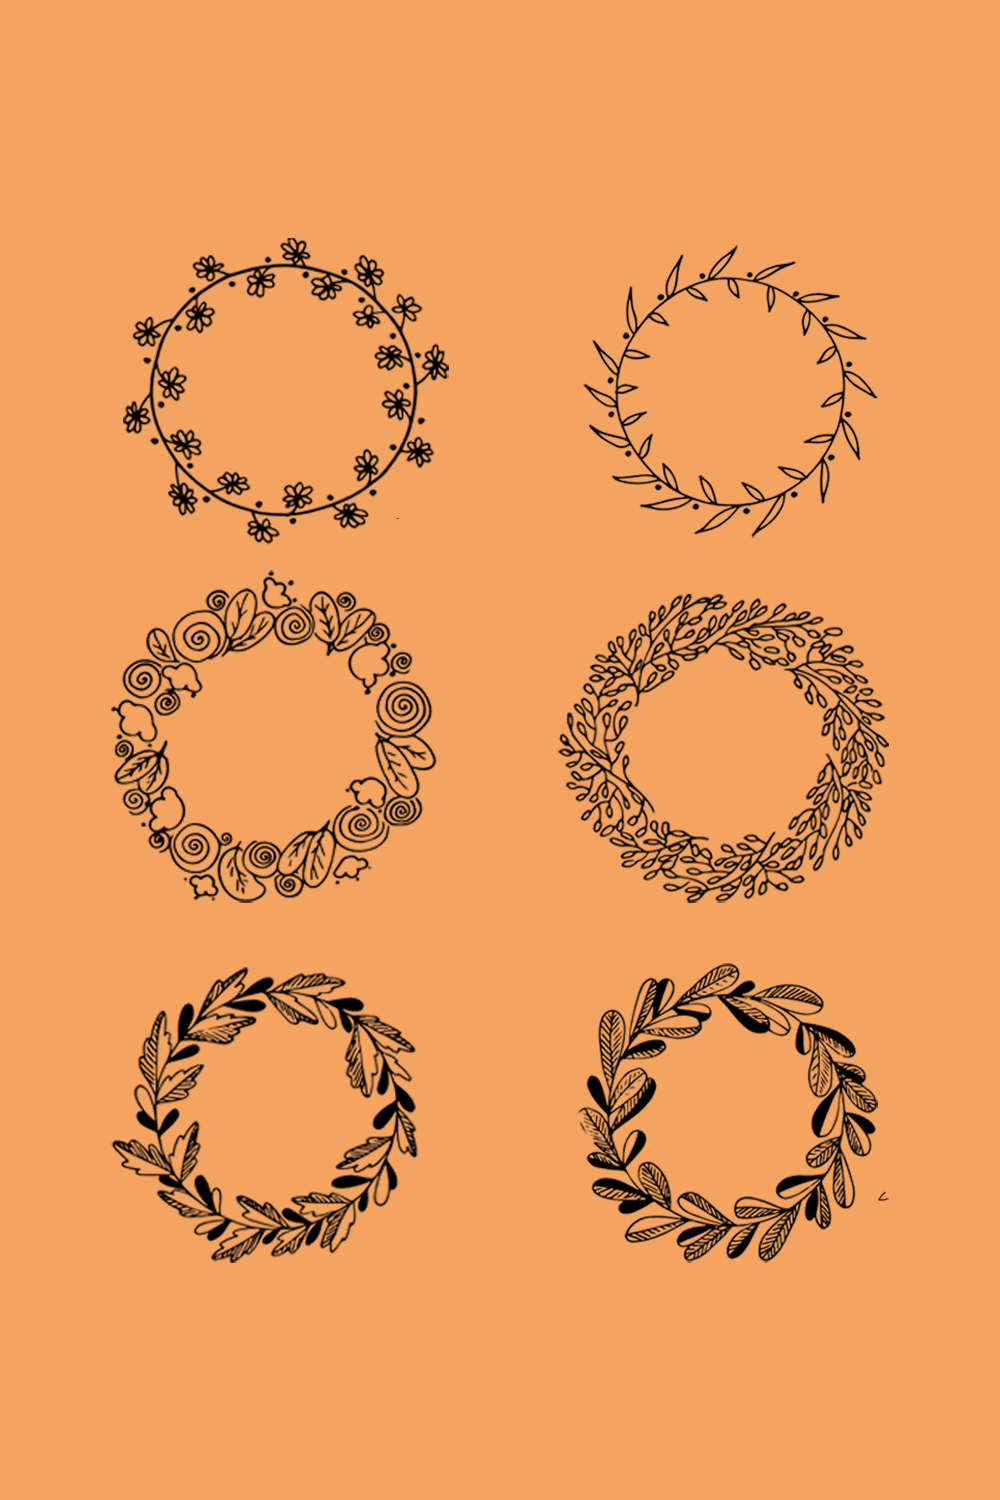 Set of Hand Drawn Floral Wreaths with Leaves Vector pinterest image.